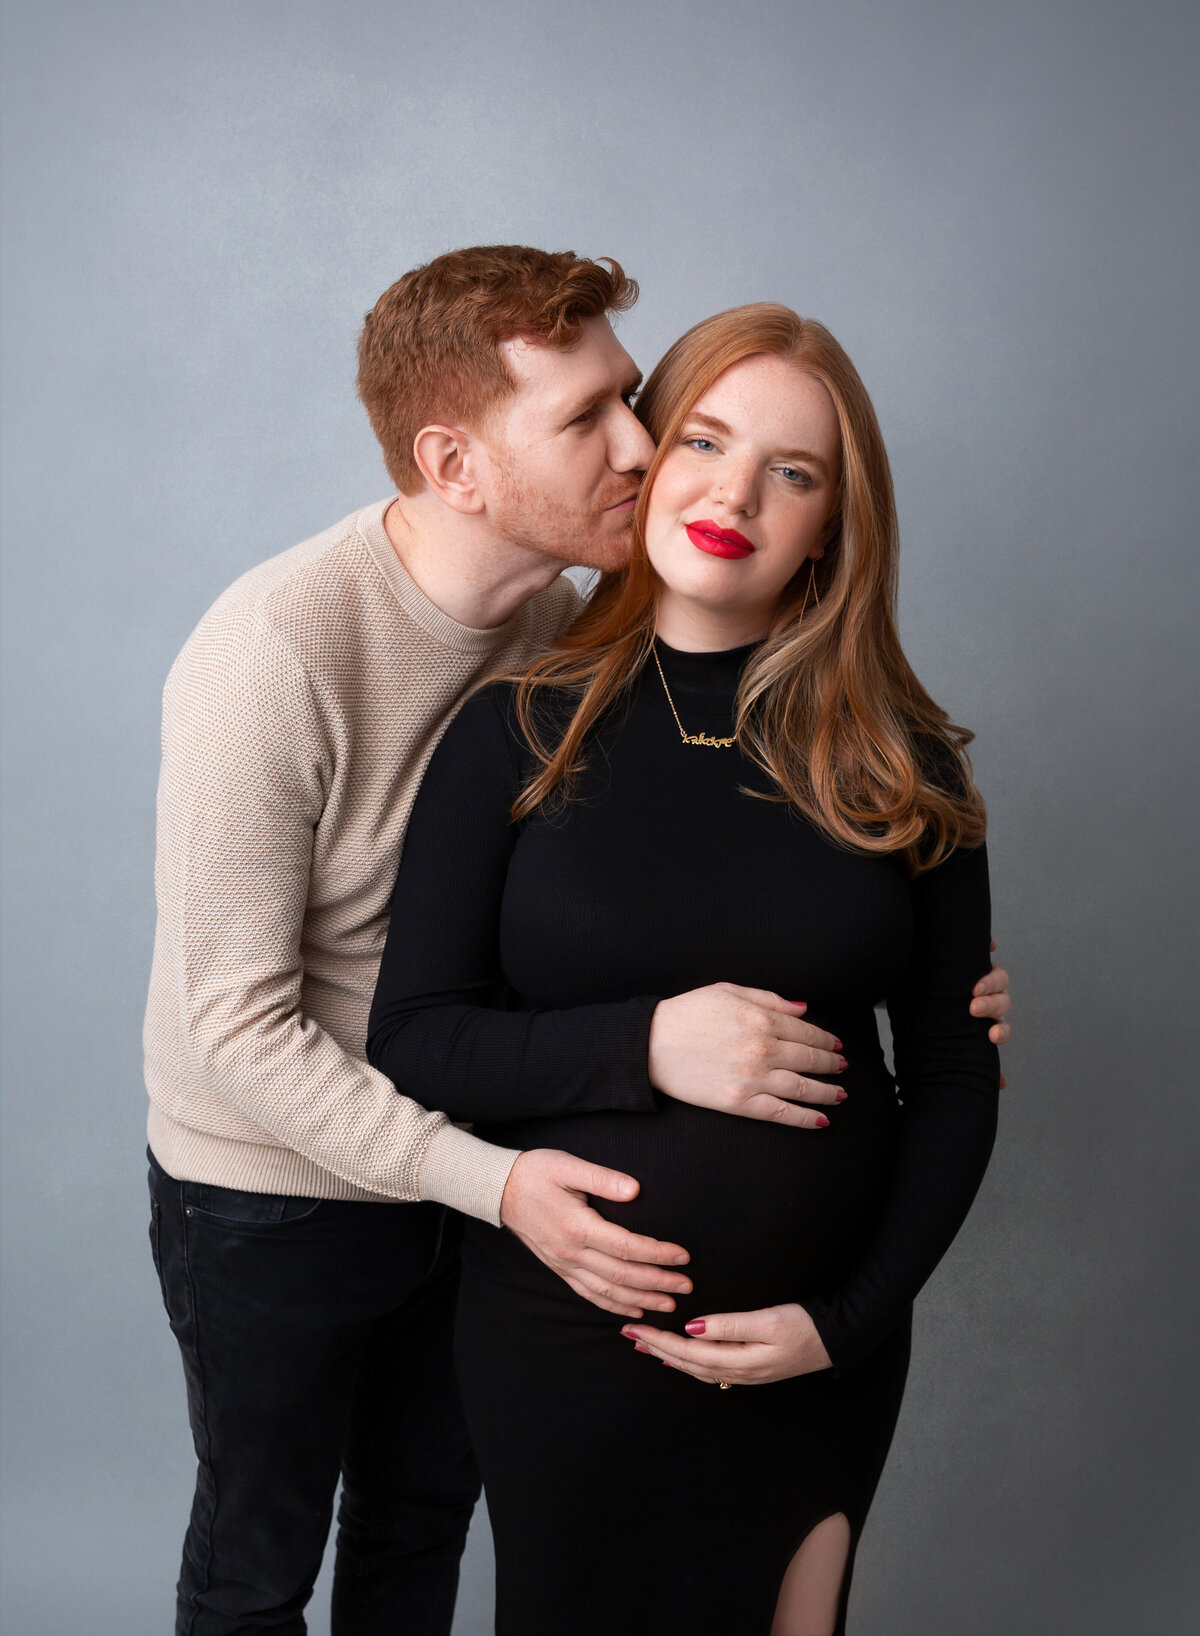 Expectant mom in fitted black dress poses for maternity photoshoot in Brooklyn, NY. Mom has one hand above and below her bump. Expectant dad stands behind mom kissing her cheek.